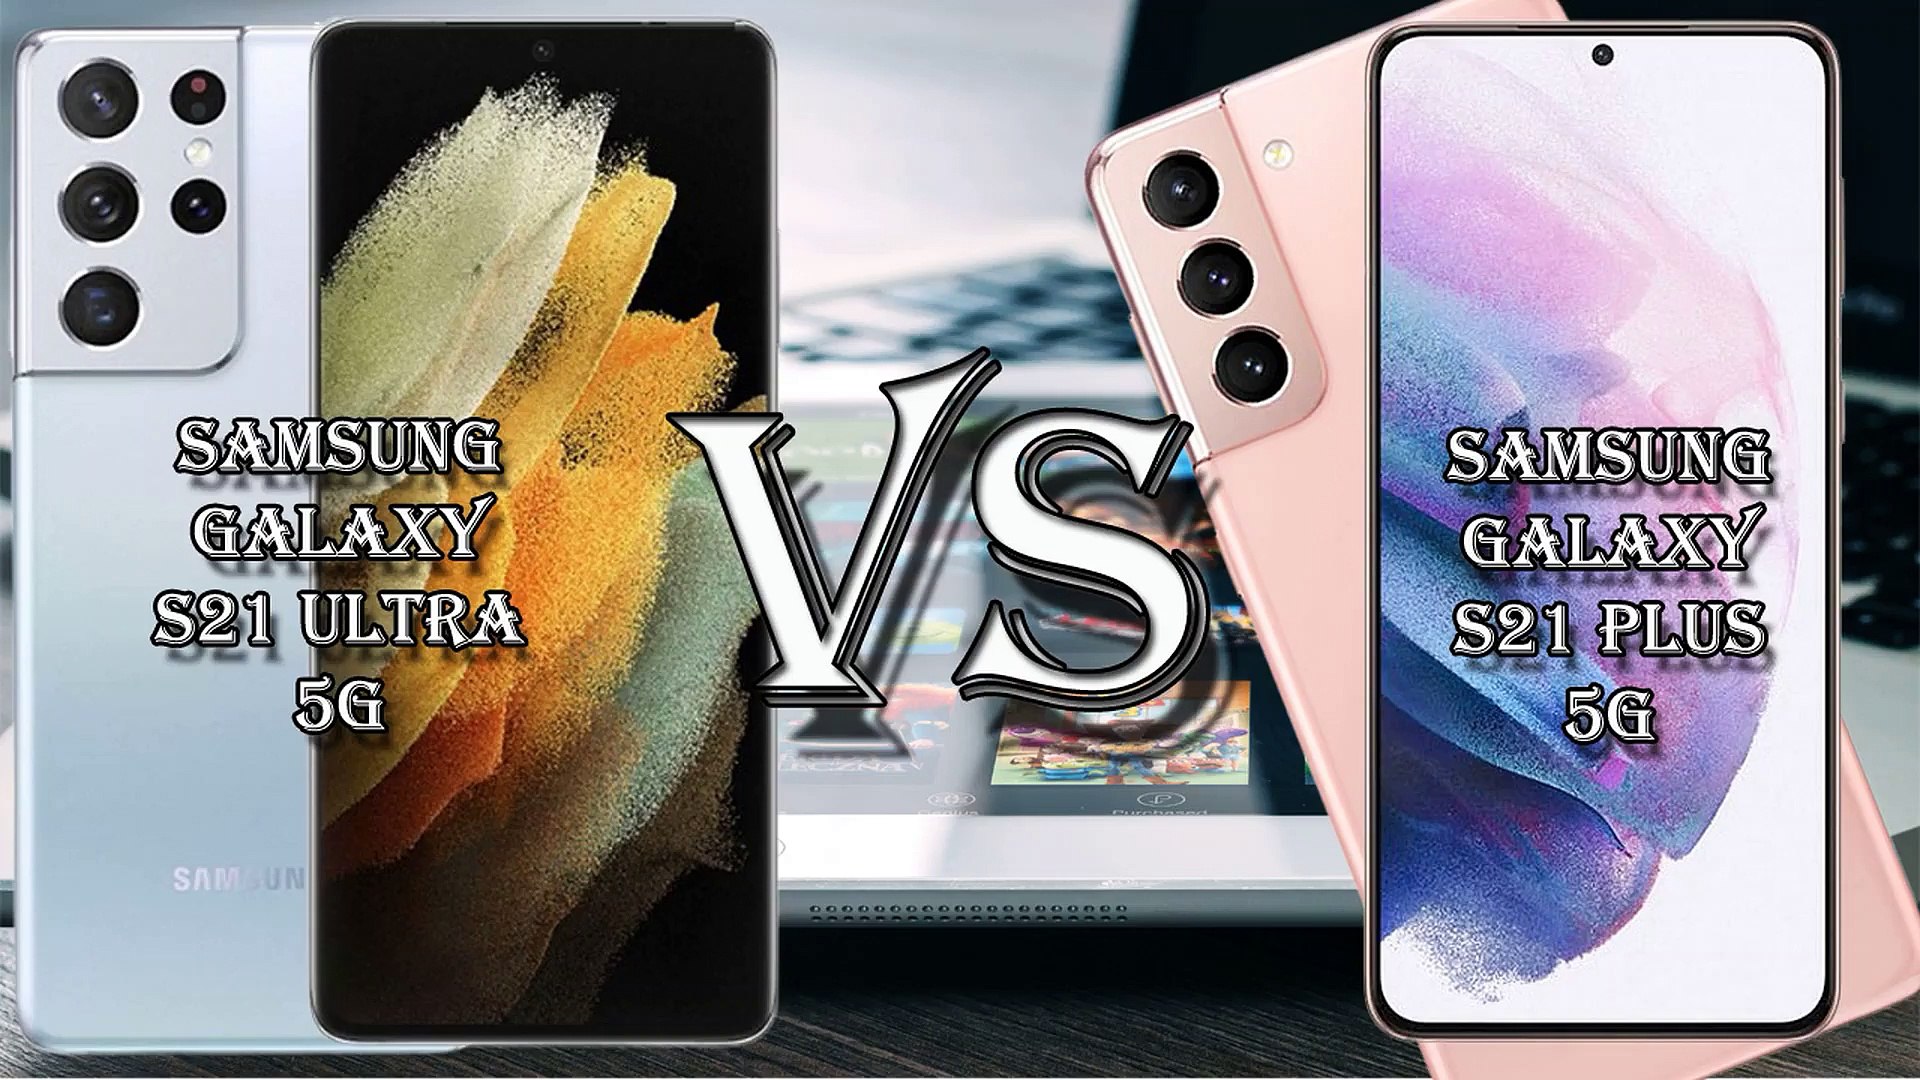 Samsung Galaxy S21 Ultra 5g Vs Samsung S21 5g Specification Comparison Video Dailymotion